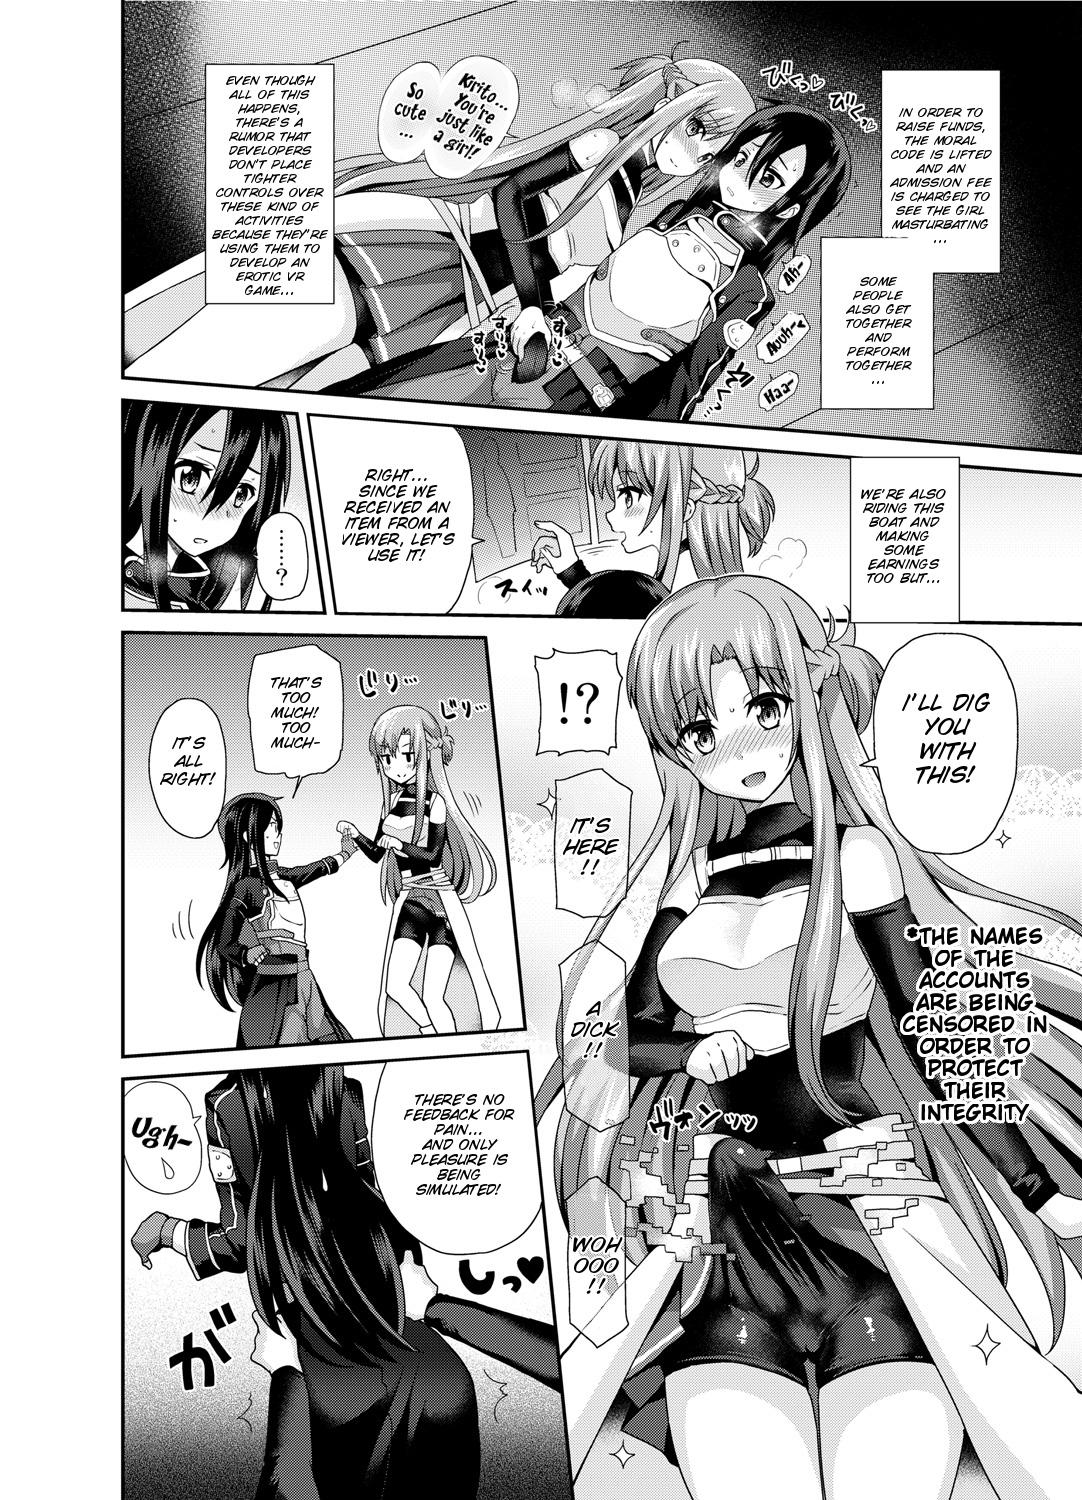 Shoes Sword of Asuna - Sword art online Whore - Page 6